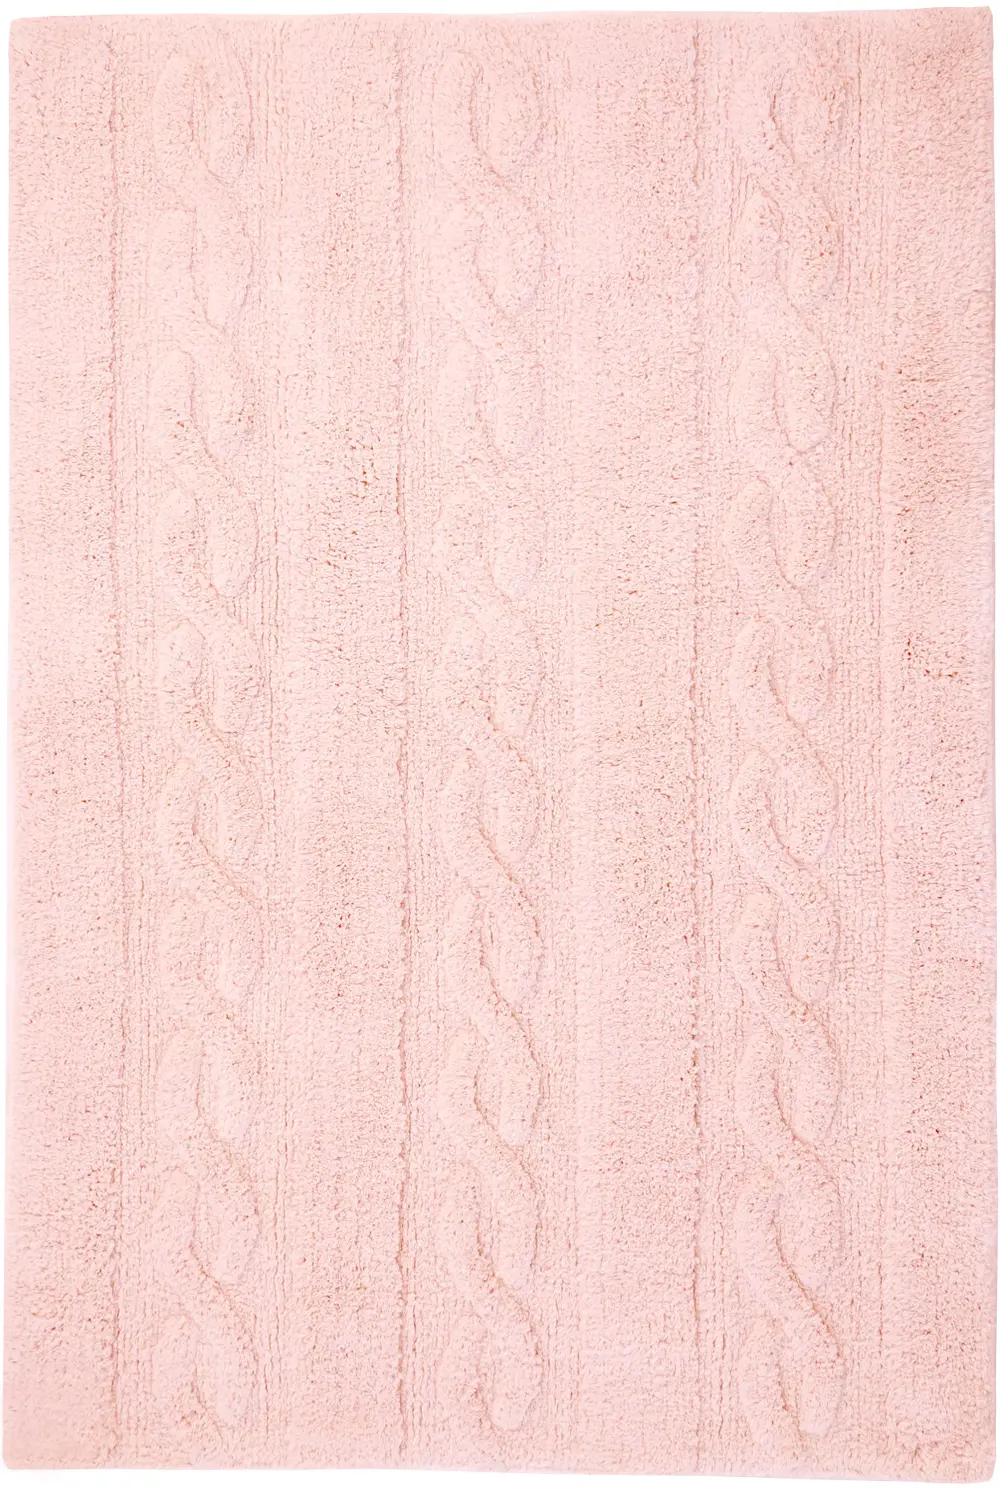 C-TR-SP 4 x 5 Small Braids Soft Pink Washable Rug-1